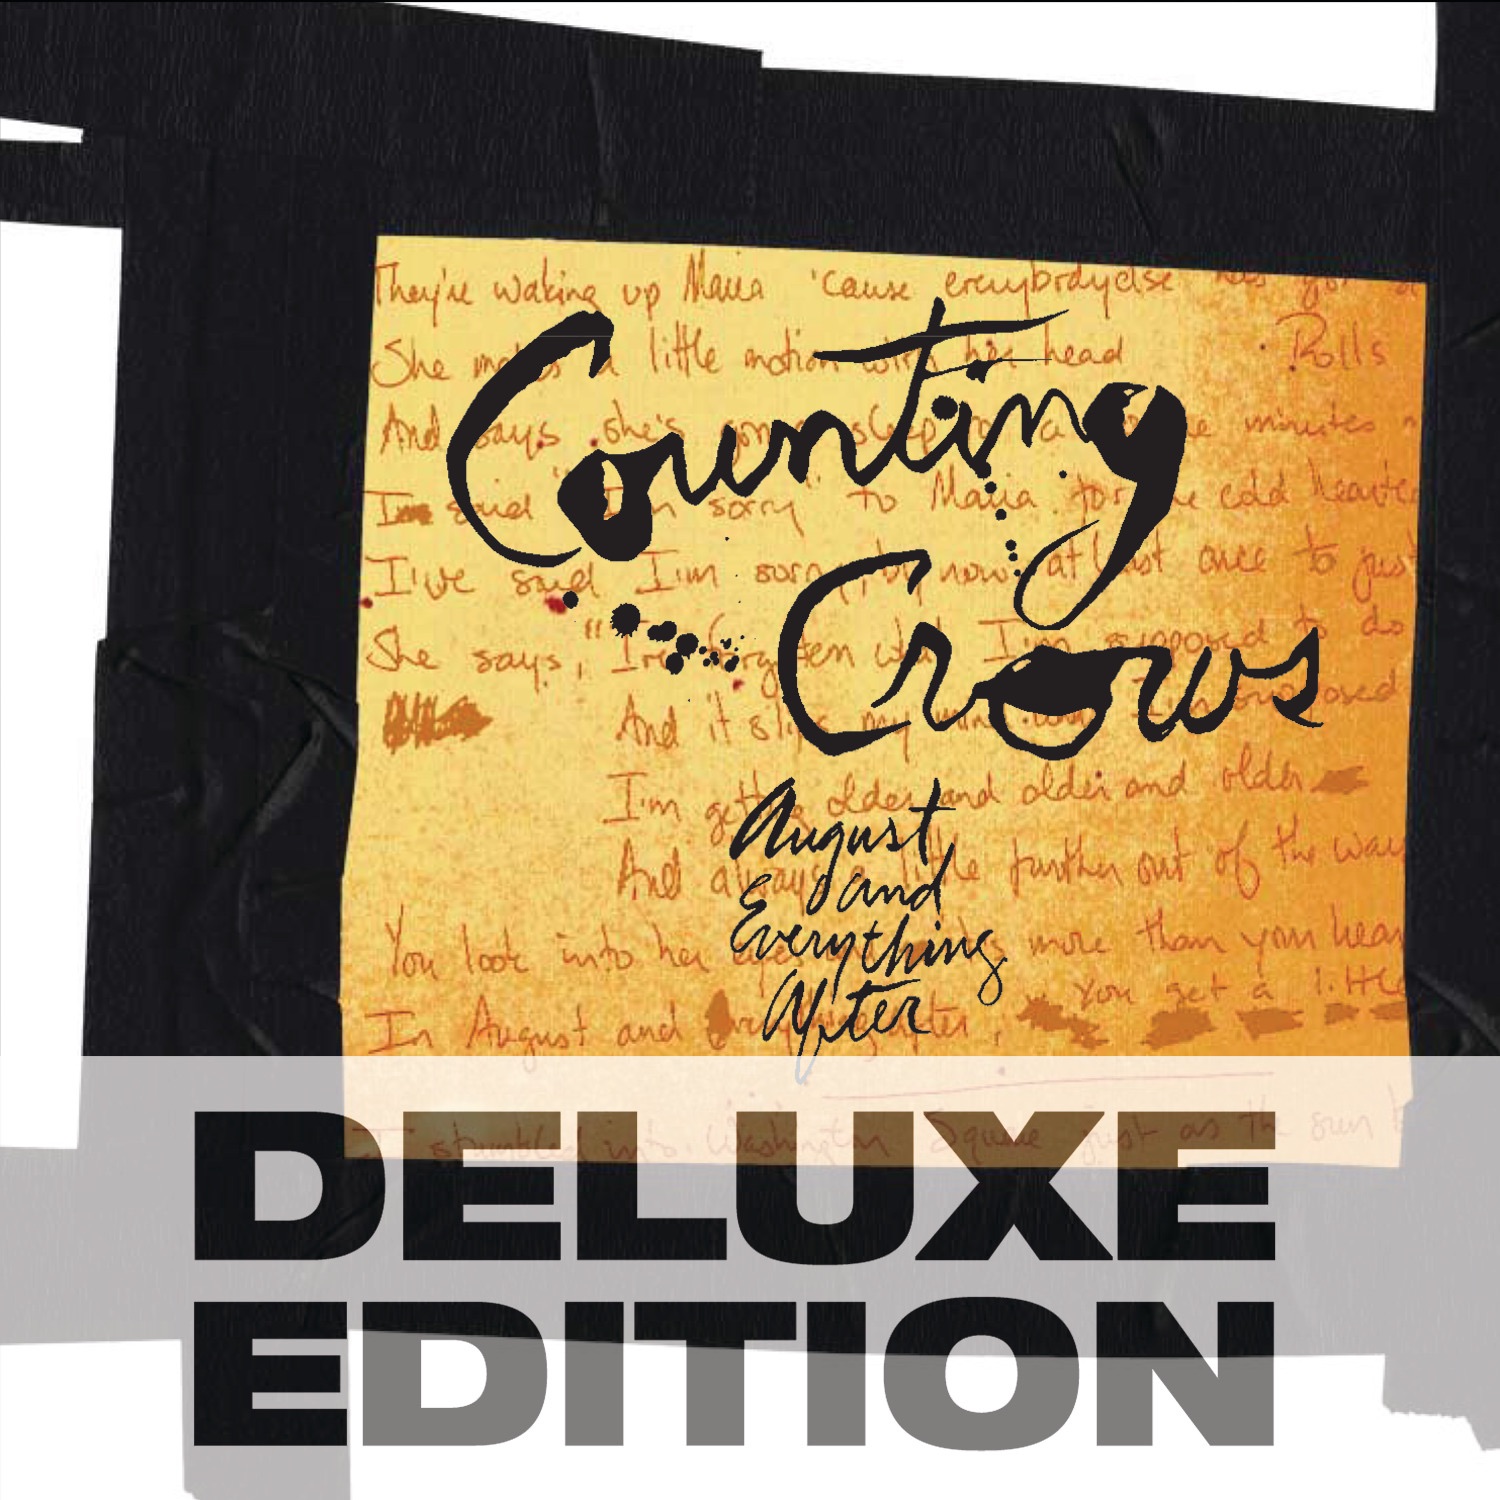 Counting Crows - August and Everything After (Deluxe Edition)